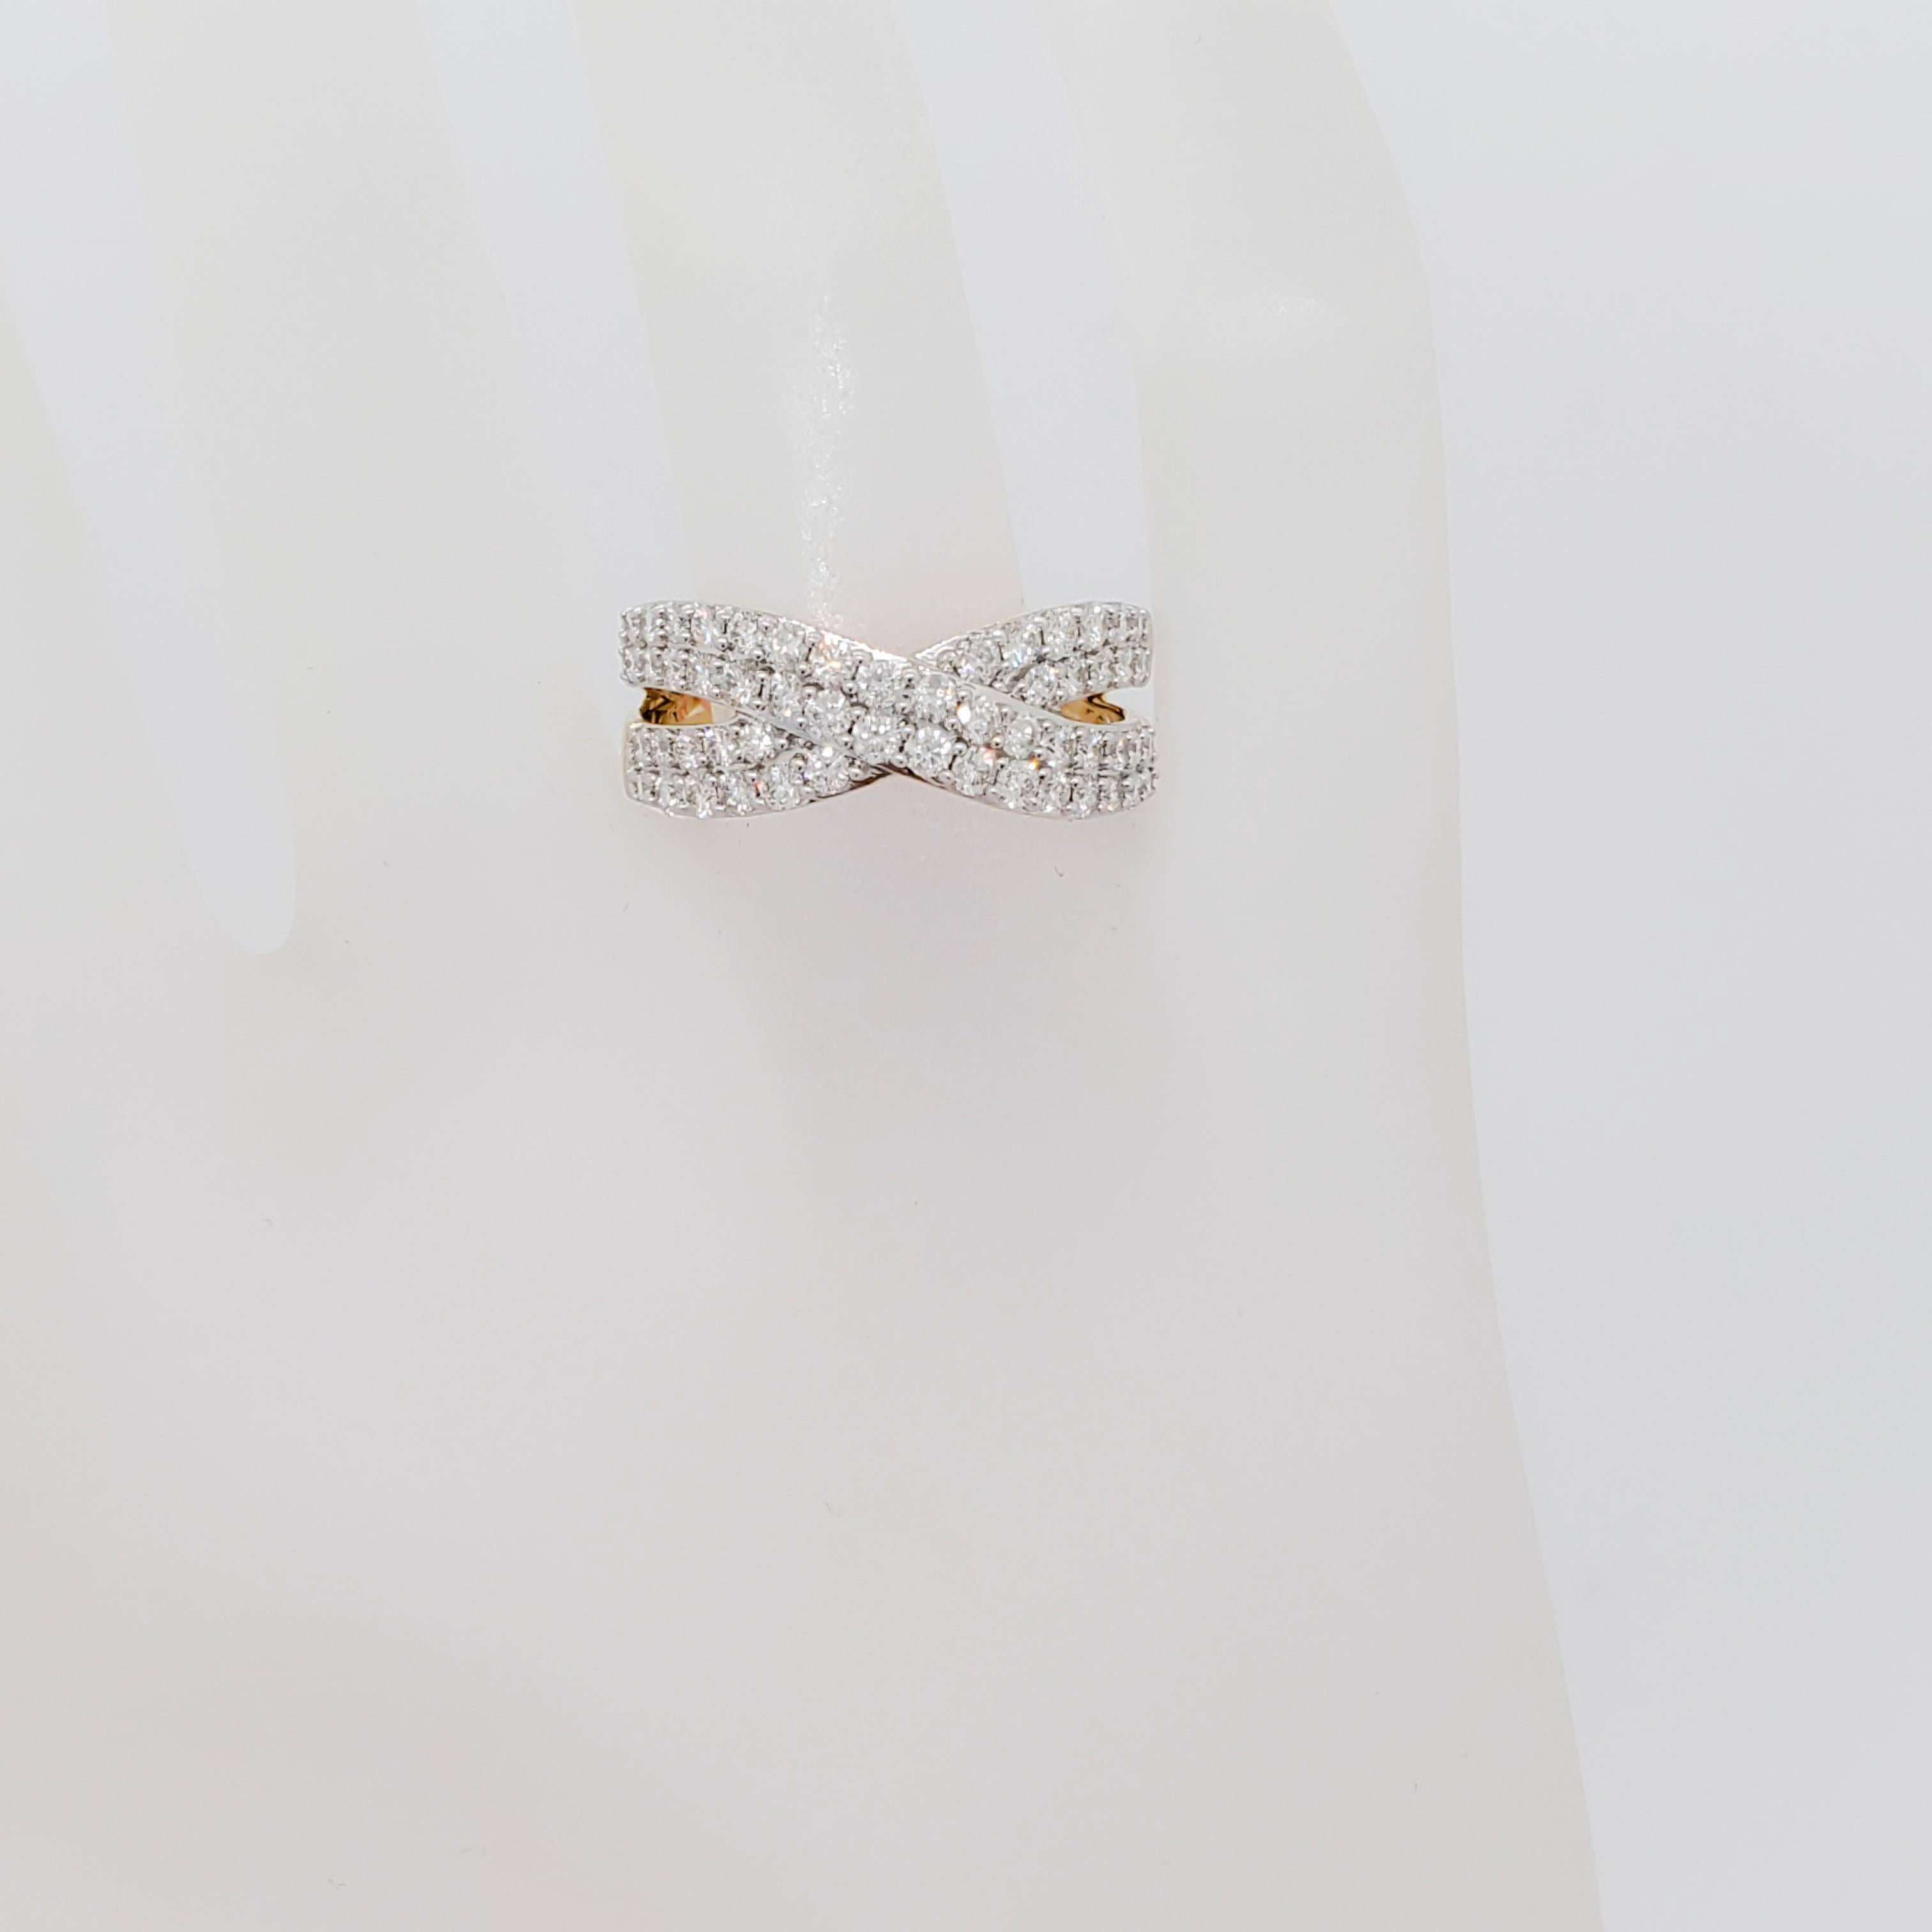 White Diamond Ring with a Criss Cross Pattern in 14k Yellow Gold In New Condition For Sale In Los Angeles, CA